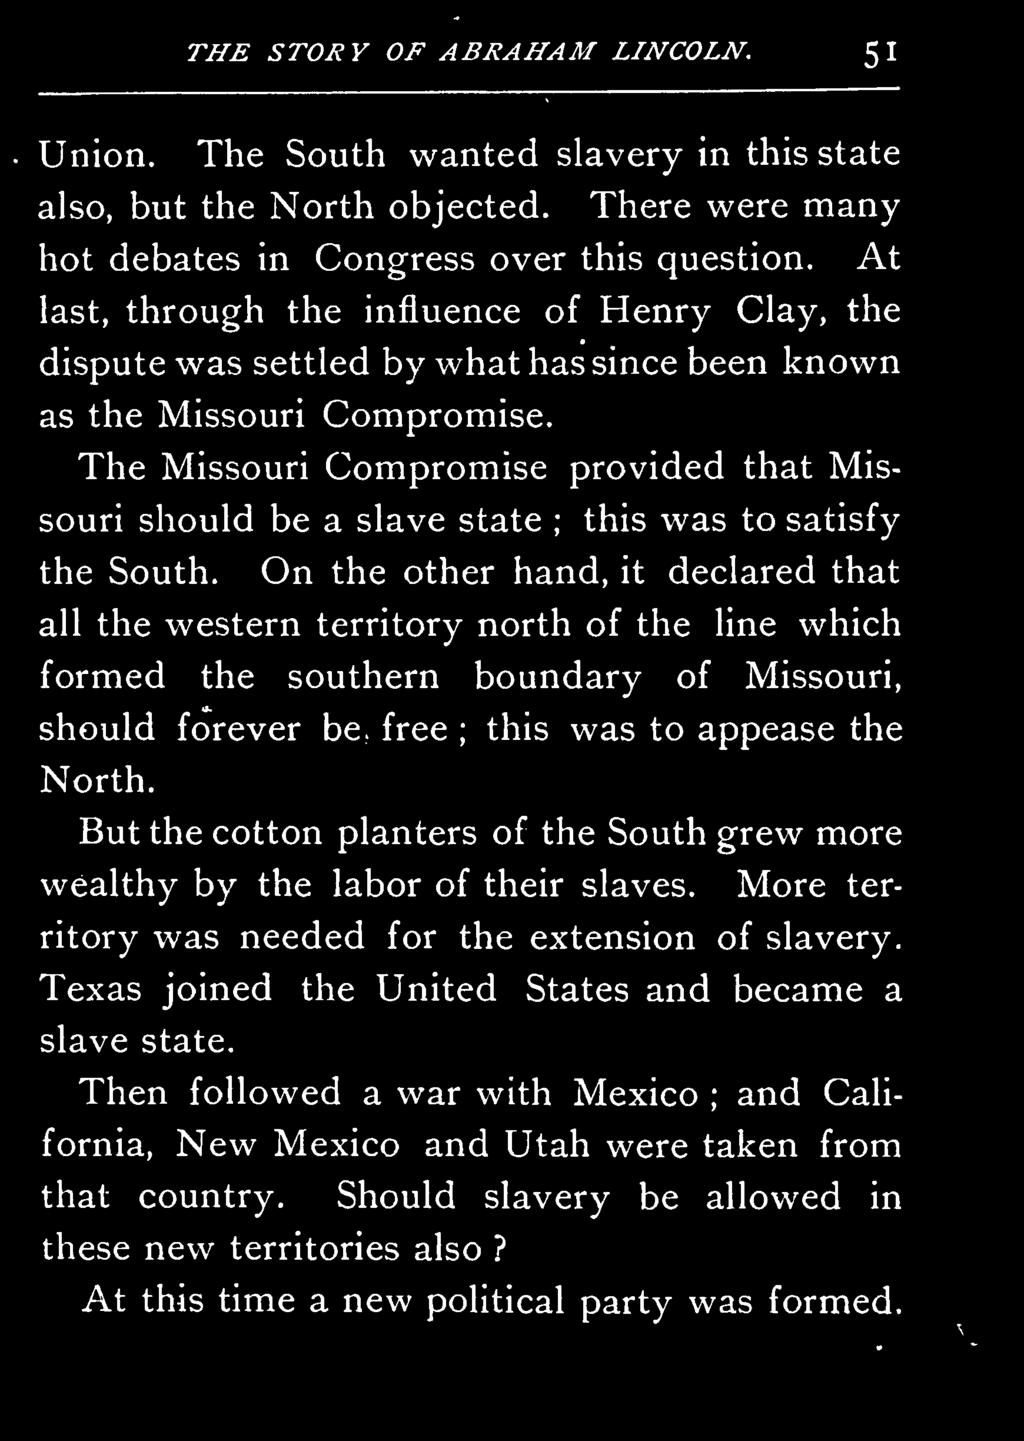 On the other hand, it declared that all the western territory north of the line which formed the southern boundary of Missouri, should forever be free ; this was to